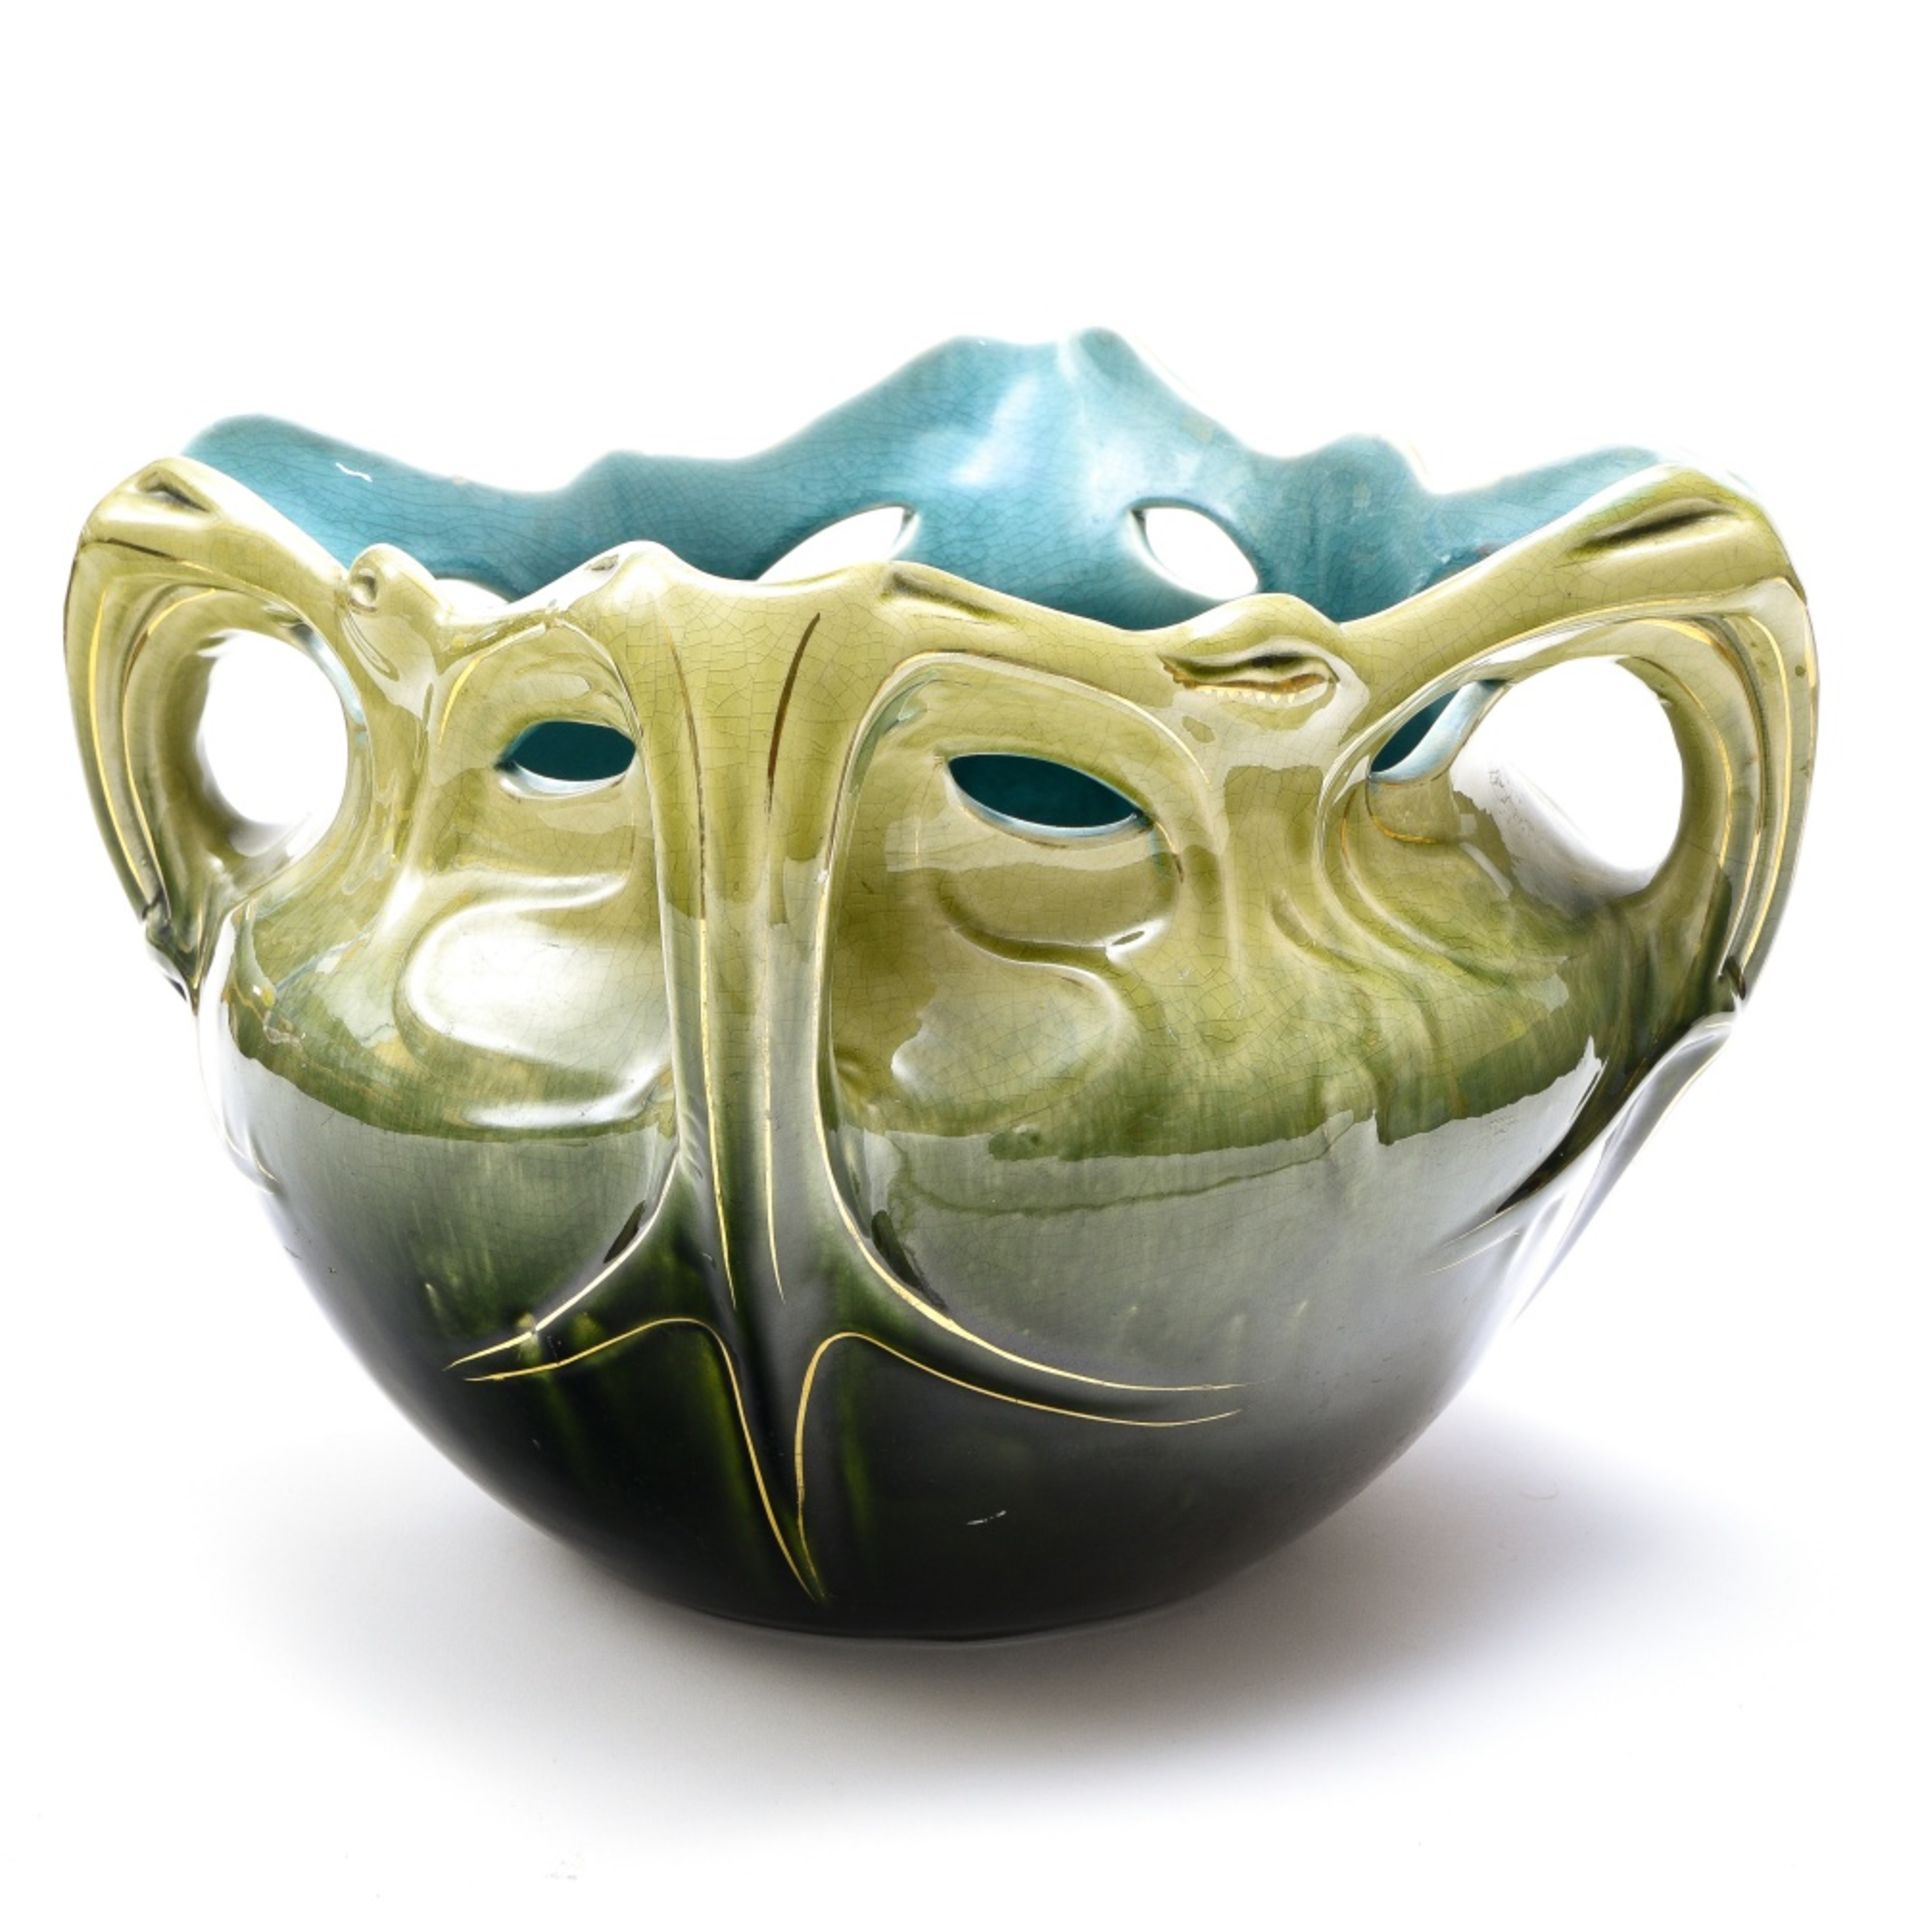 Hector GUIMARD (1867 1942) and Fa•encerie DE BRUYN Chalmont case, ca. 1890, Green-enamelled